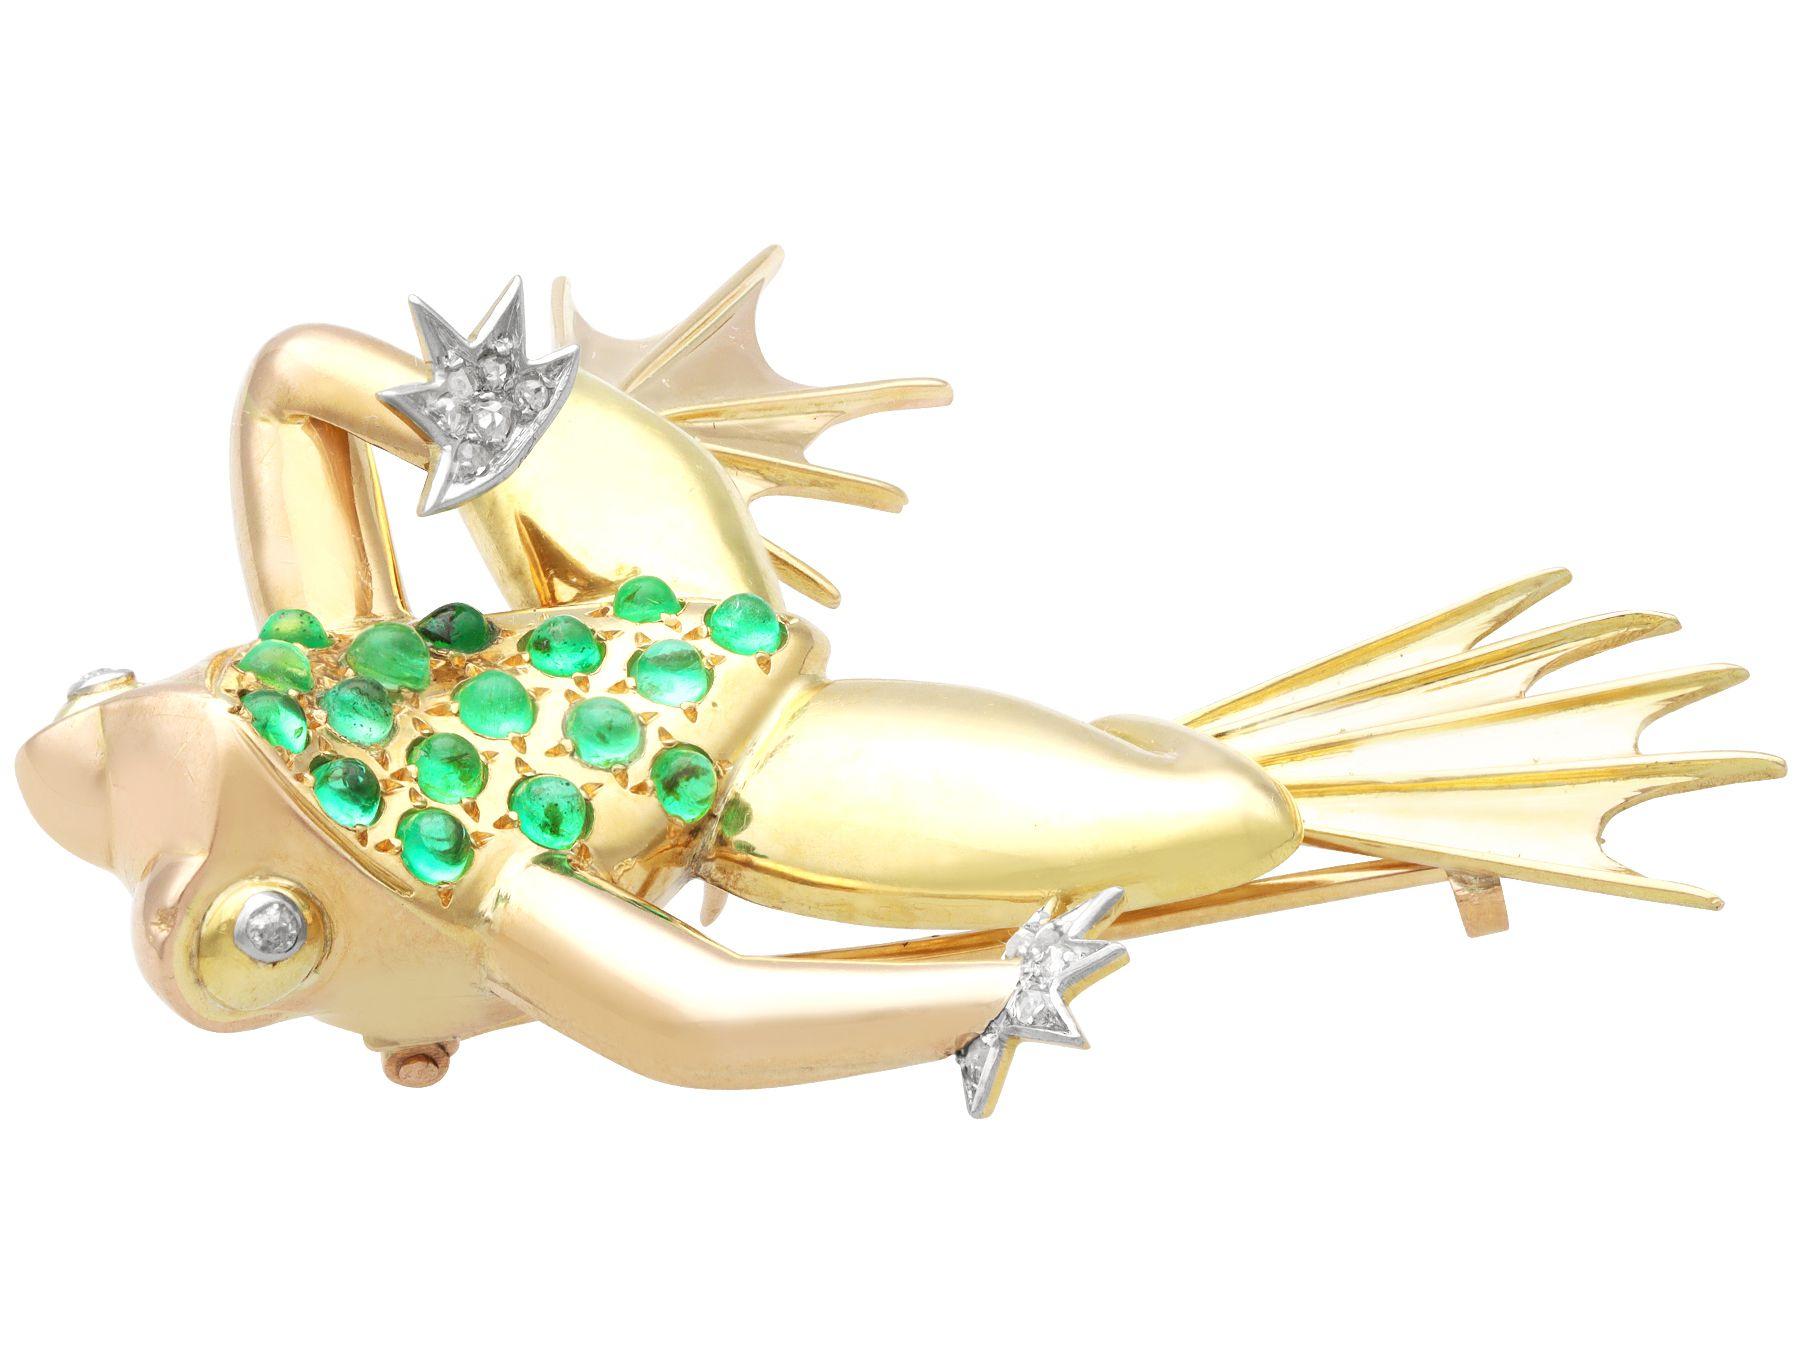 Vintage French 0.75 Carat Emerald and 0.11 Carat Diamond Yellow Gold Frog Brooch In Excellent Condition For Sale In Jesmond, Newcastle Upon Tyne